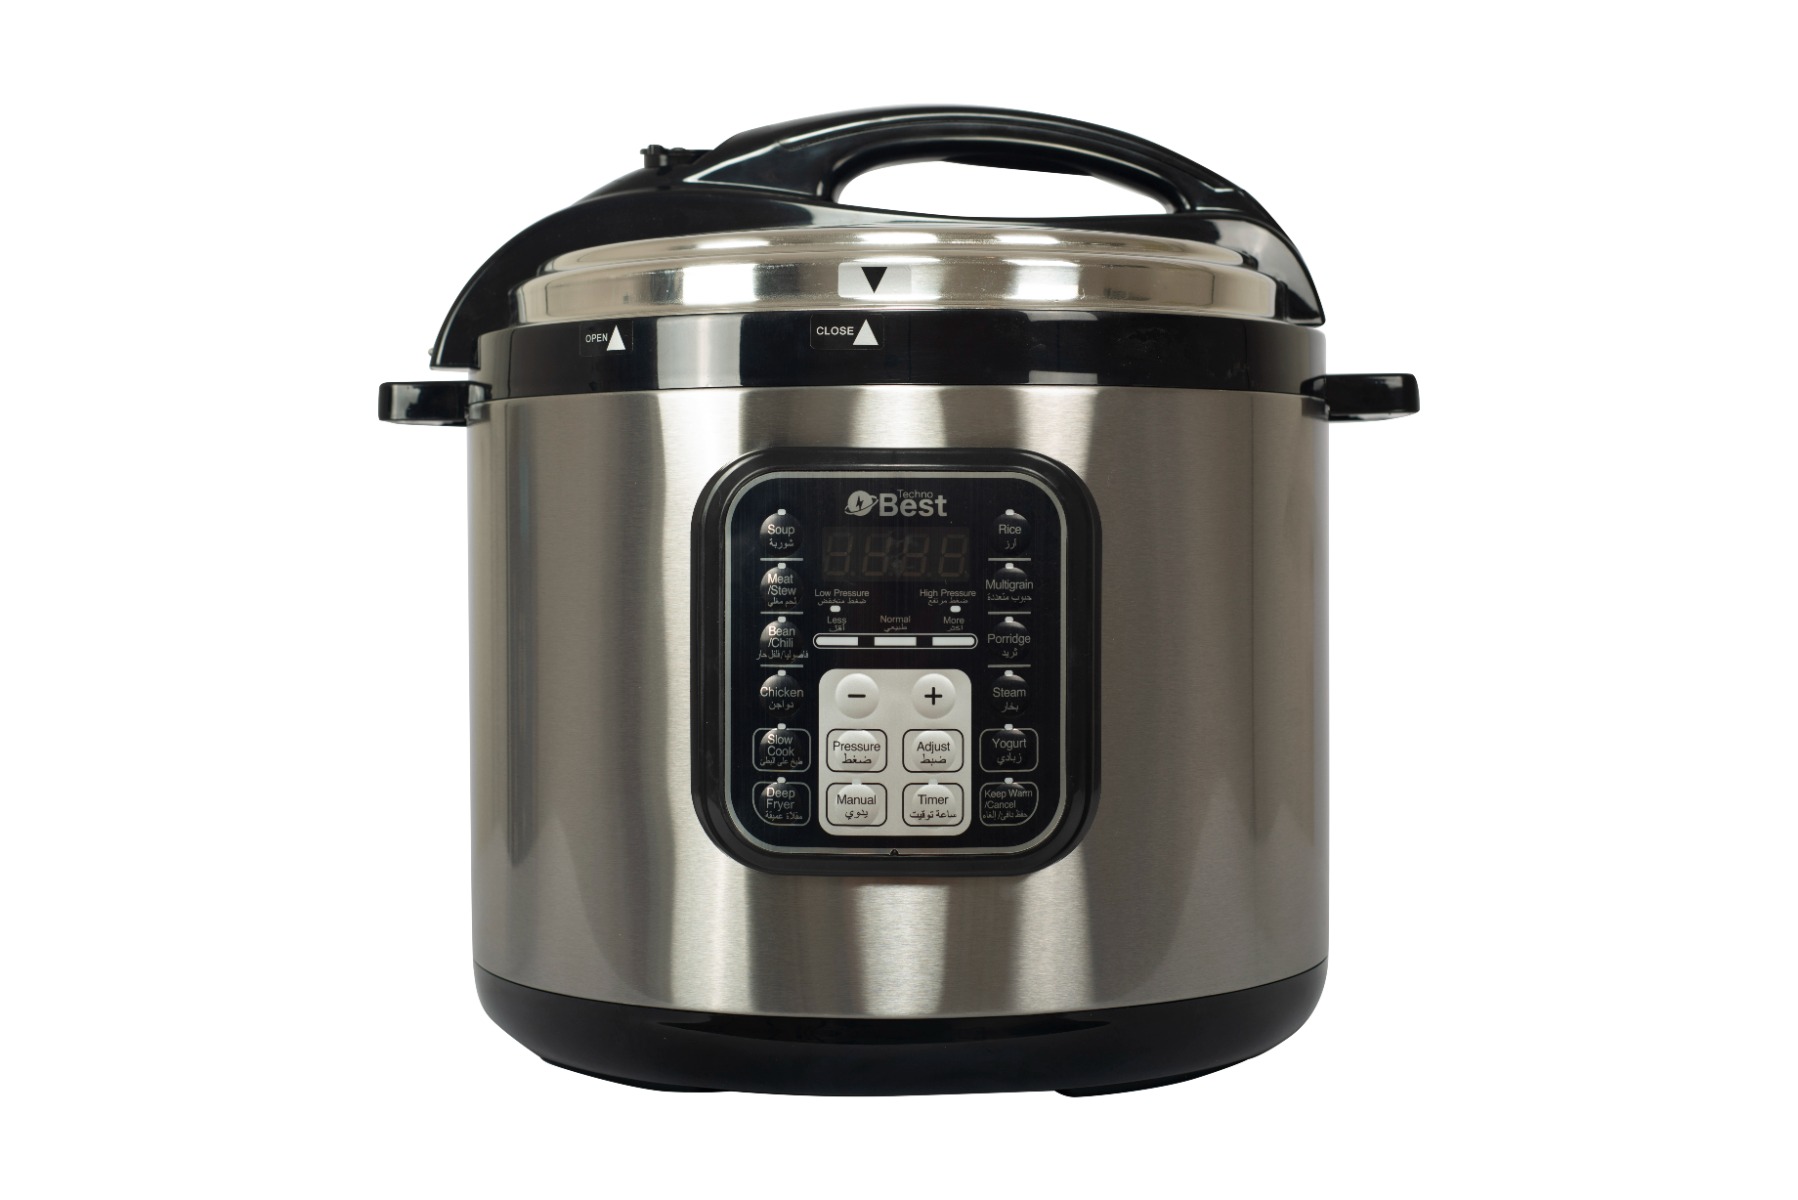 Techno Best pressure cooker 12-liter, 1600W, 12 smart cooking programs. Electronic touch panel - Silver - BPC-012 